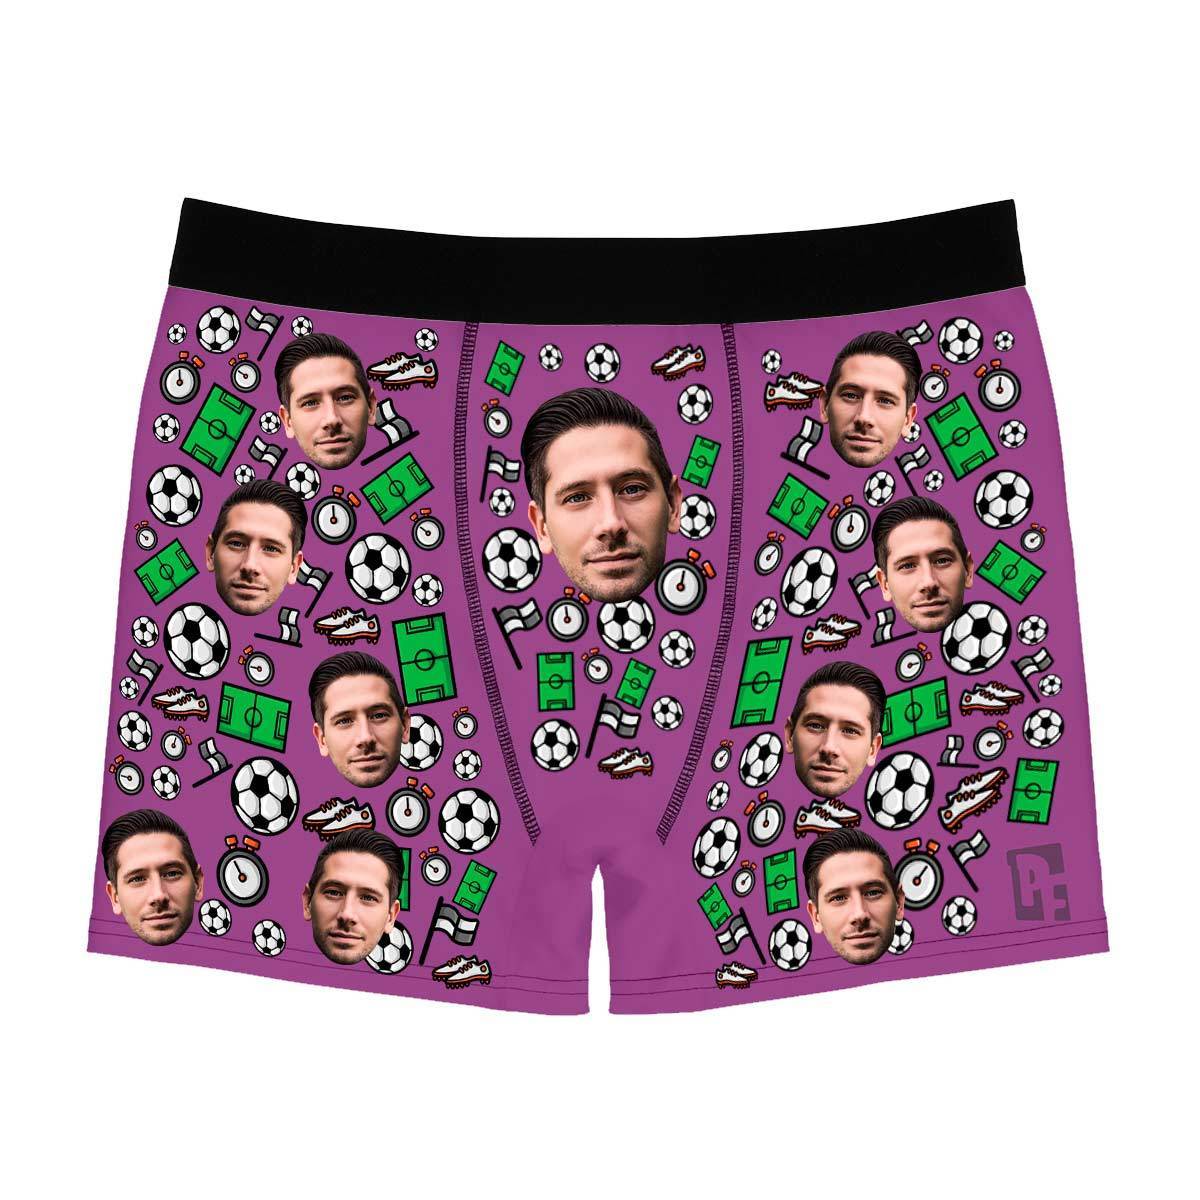 Purple Football men's boxer briefs personalized with photo printed on them